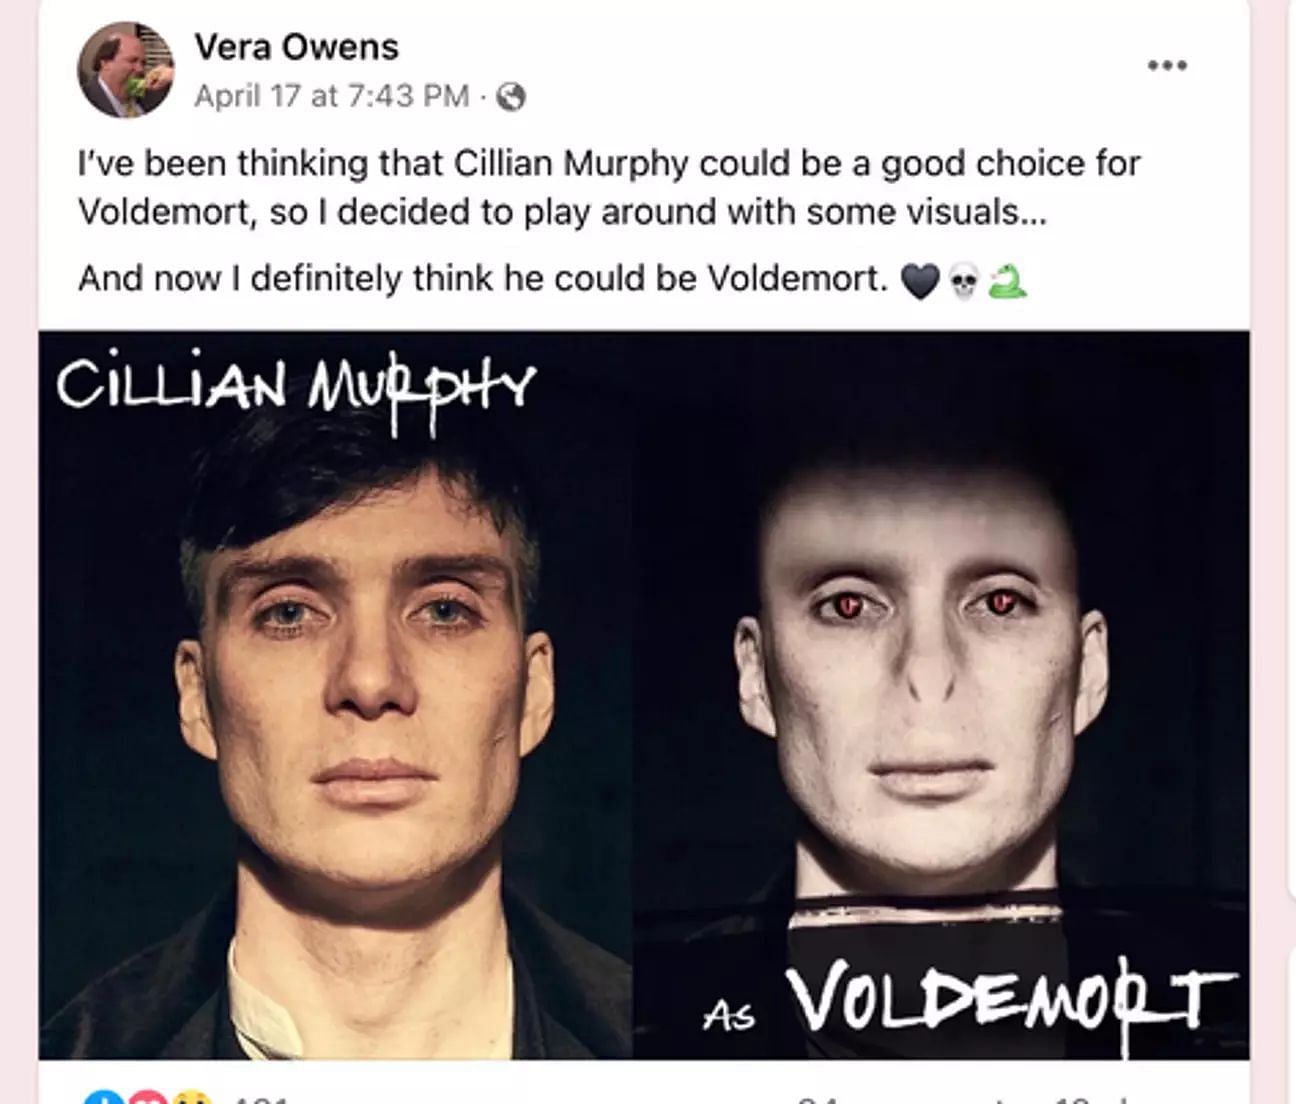 How the fan envisioned Cillian Murphy as Voldemort (Image via Facebook)